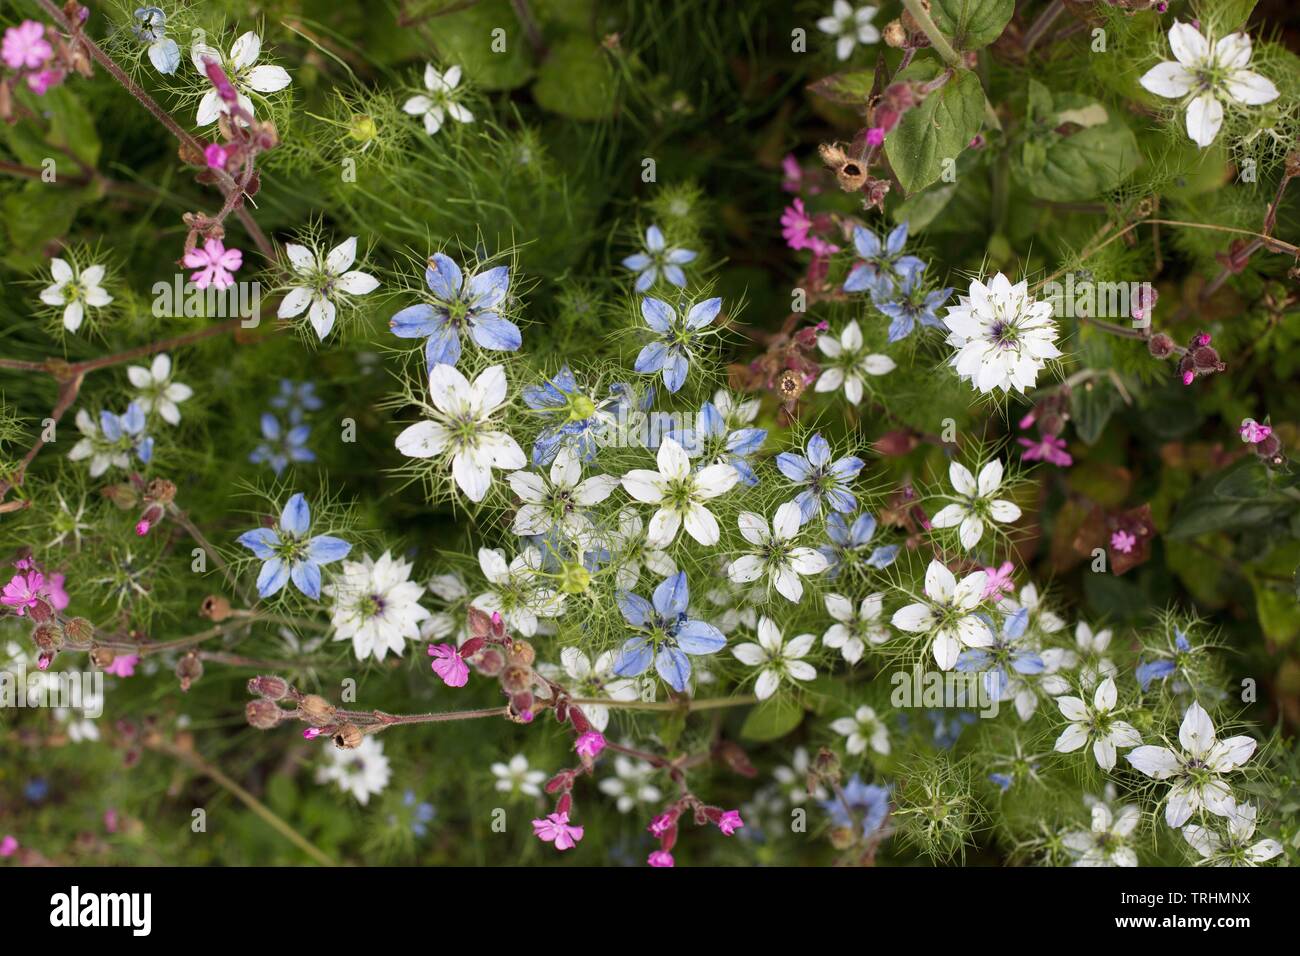 Love-In-A-Mist flowers growing with Red Campion, at Owen Rose Garden in Eugene, Oregon, USA. Stock Photo